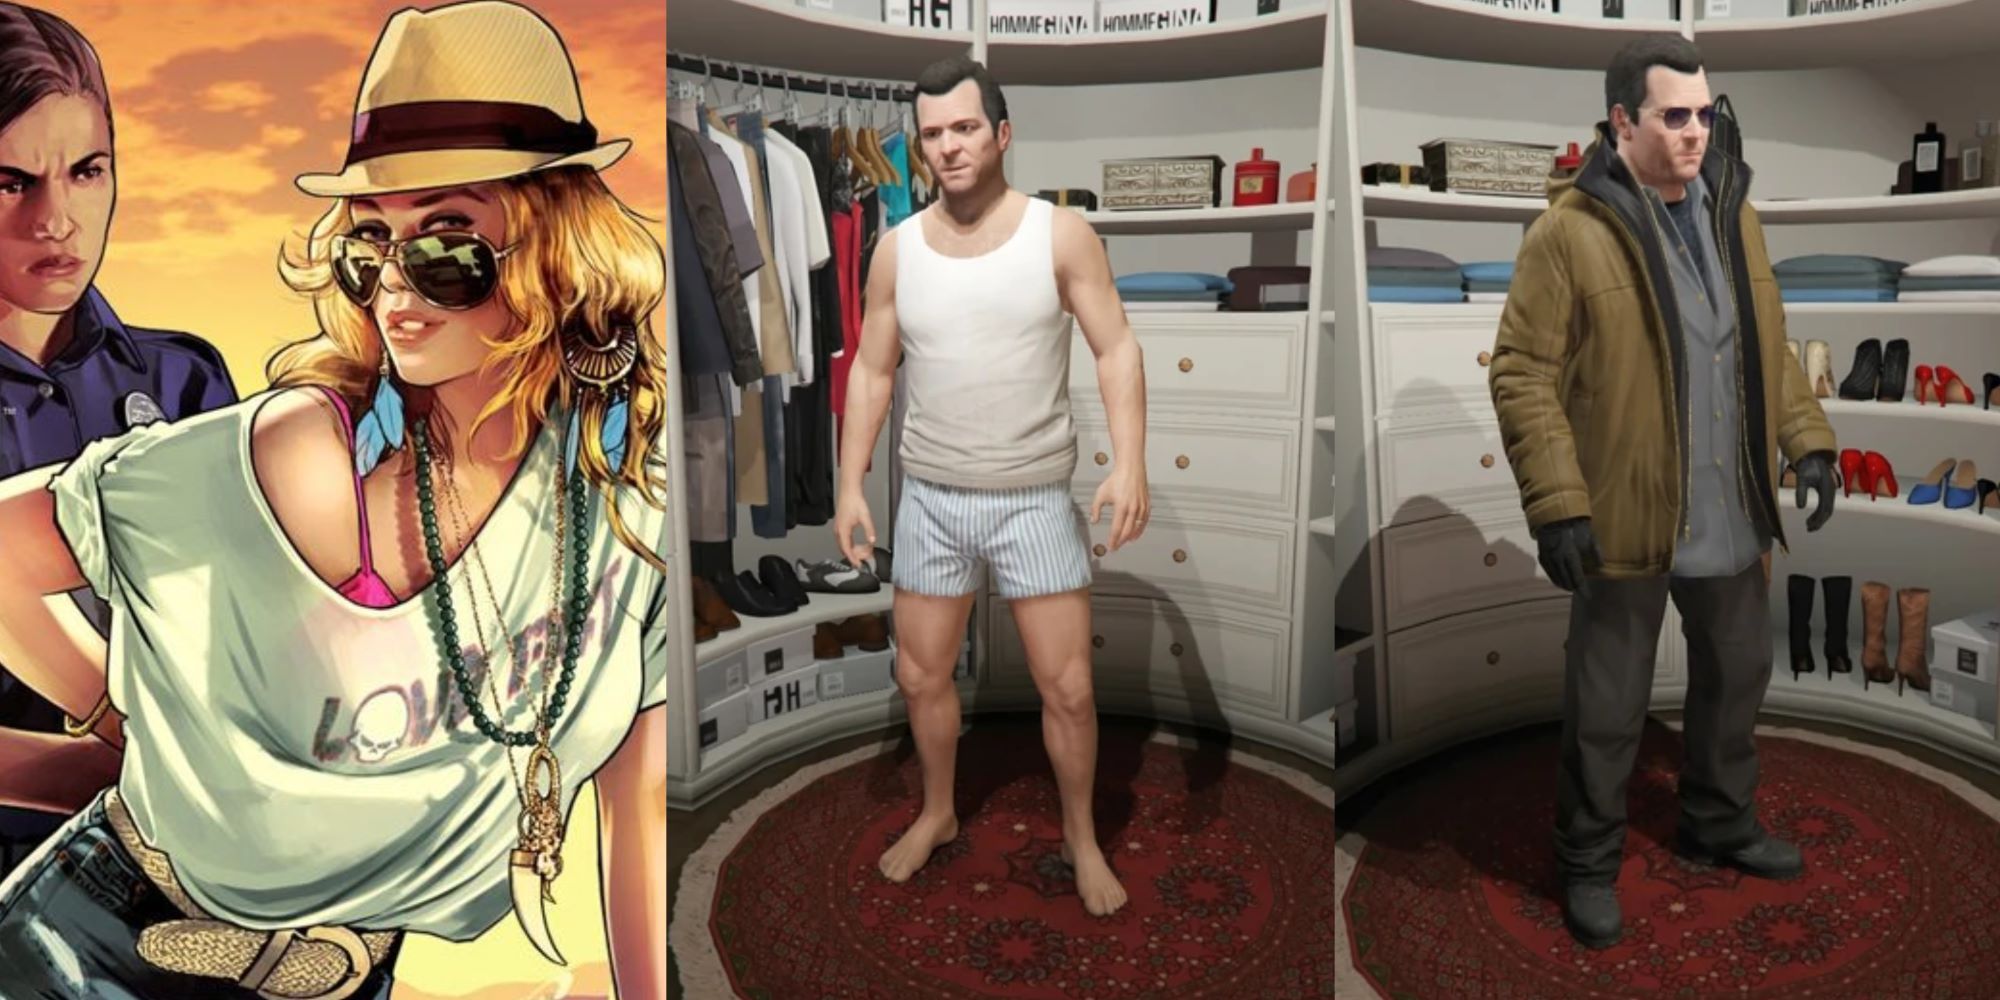 grand theft auto 5 cover with police officer arresting woman and michael in bed and dusseldorf outfits